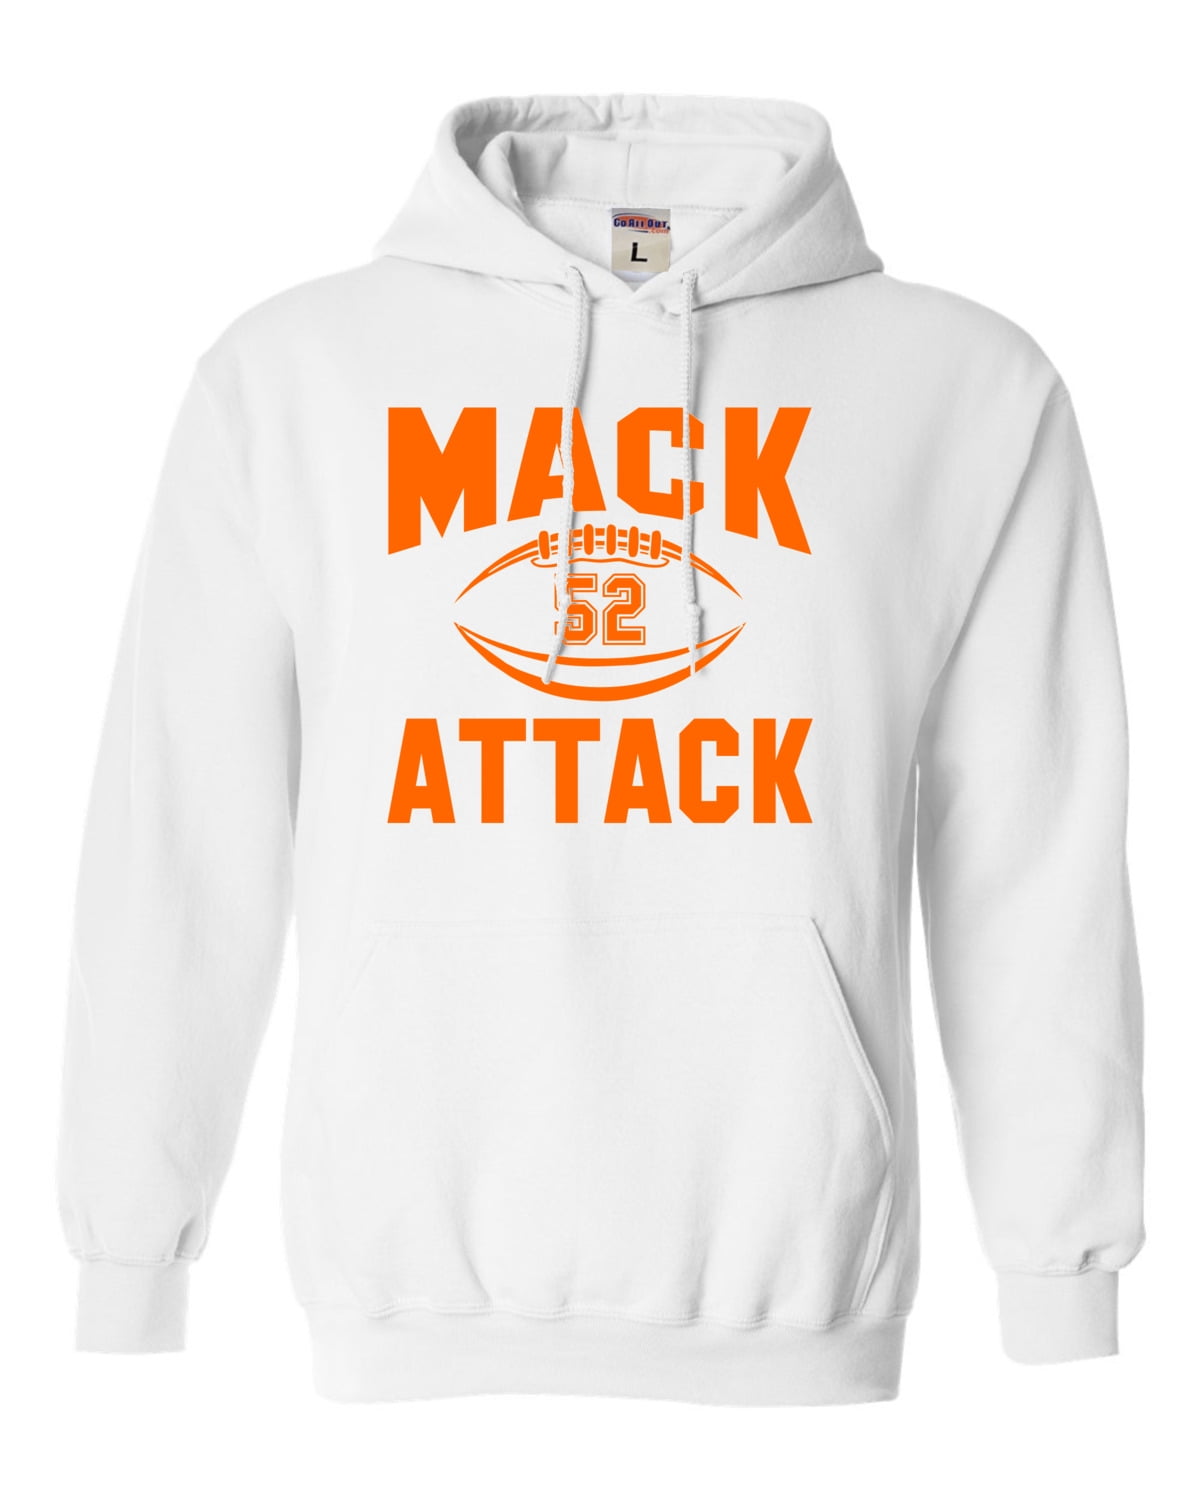 Mack Attack 52 Hoodies Adult and Youth Size 